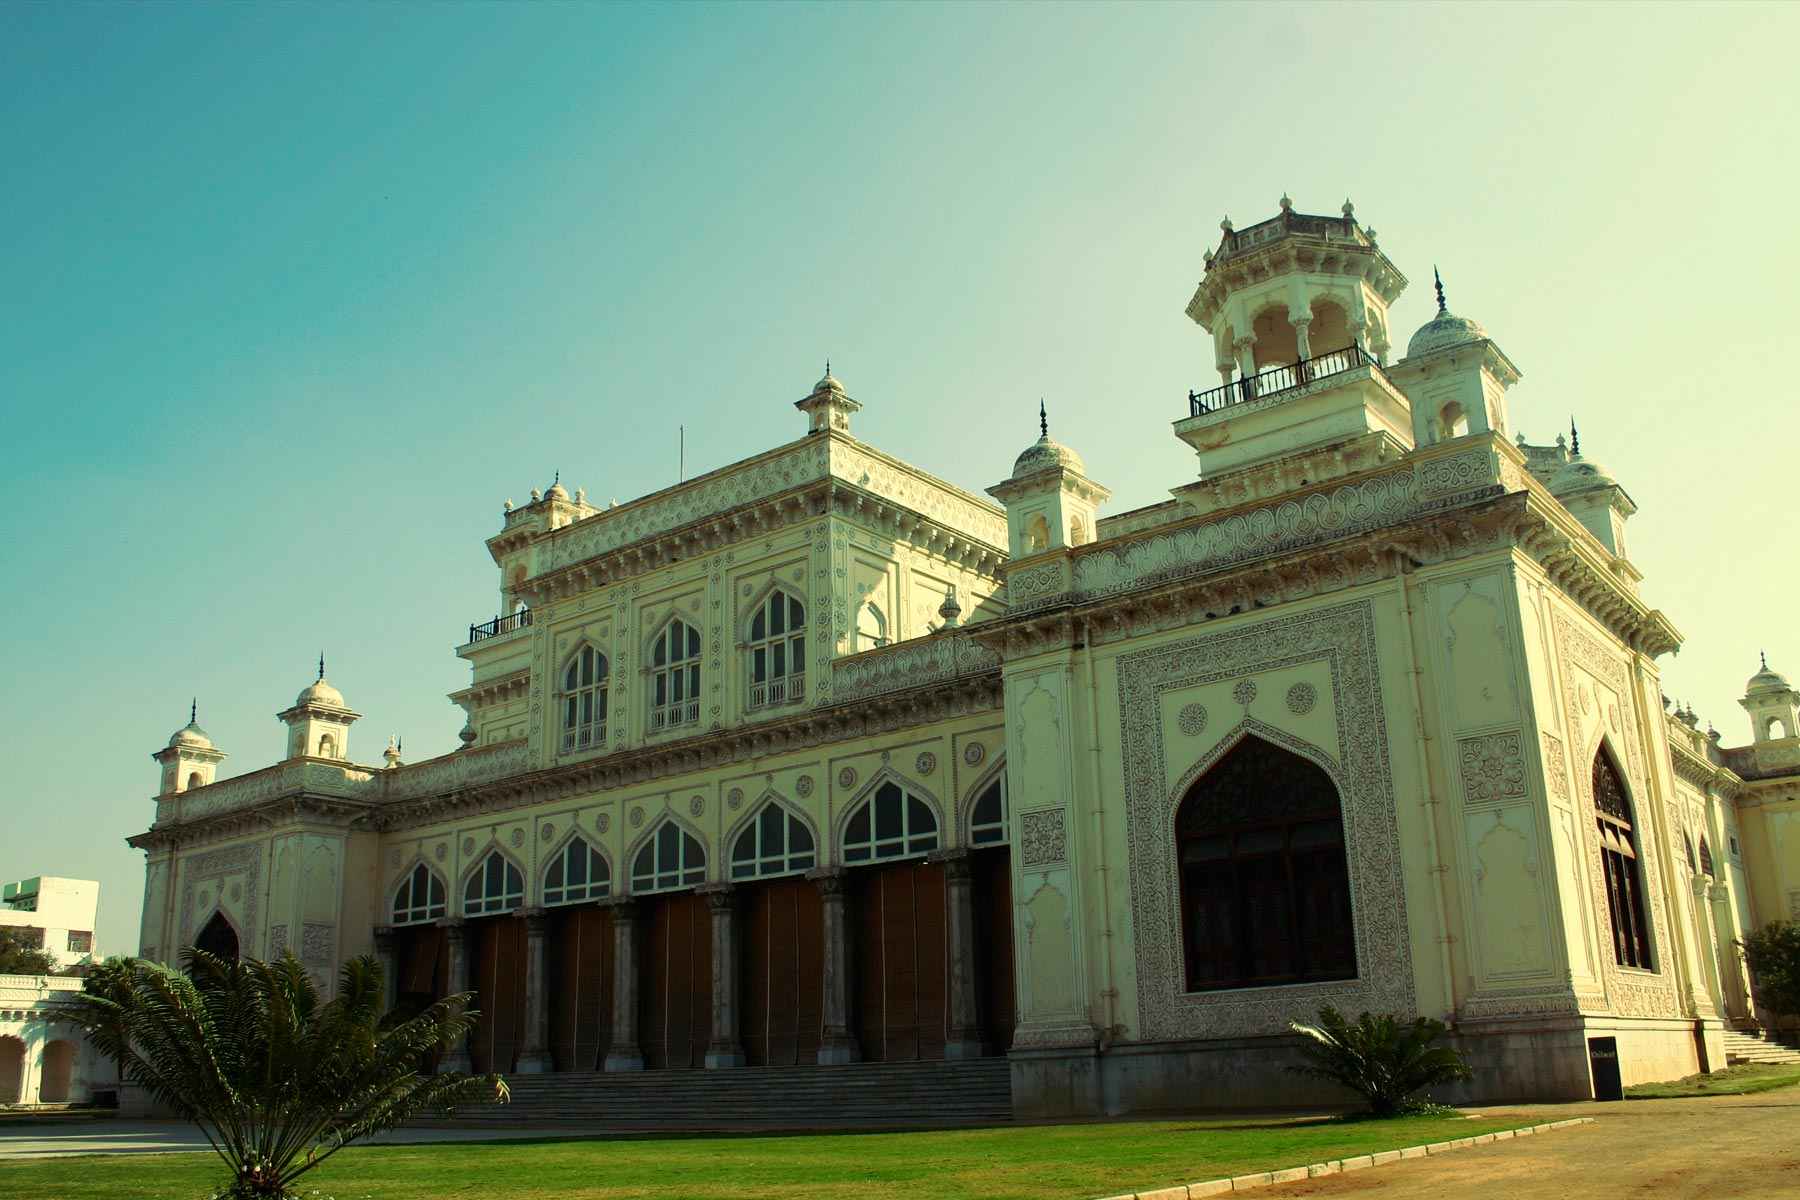 khilwat_palace_located_in_Old_hyderabad_city_a_nizam's_palace_4.jpg